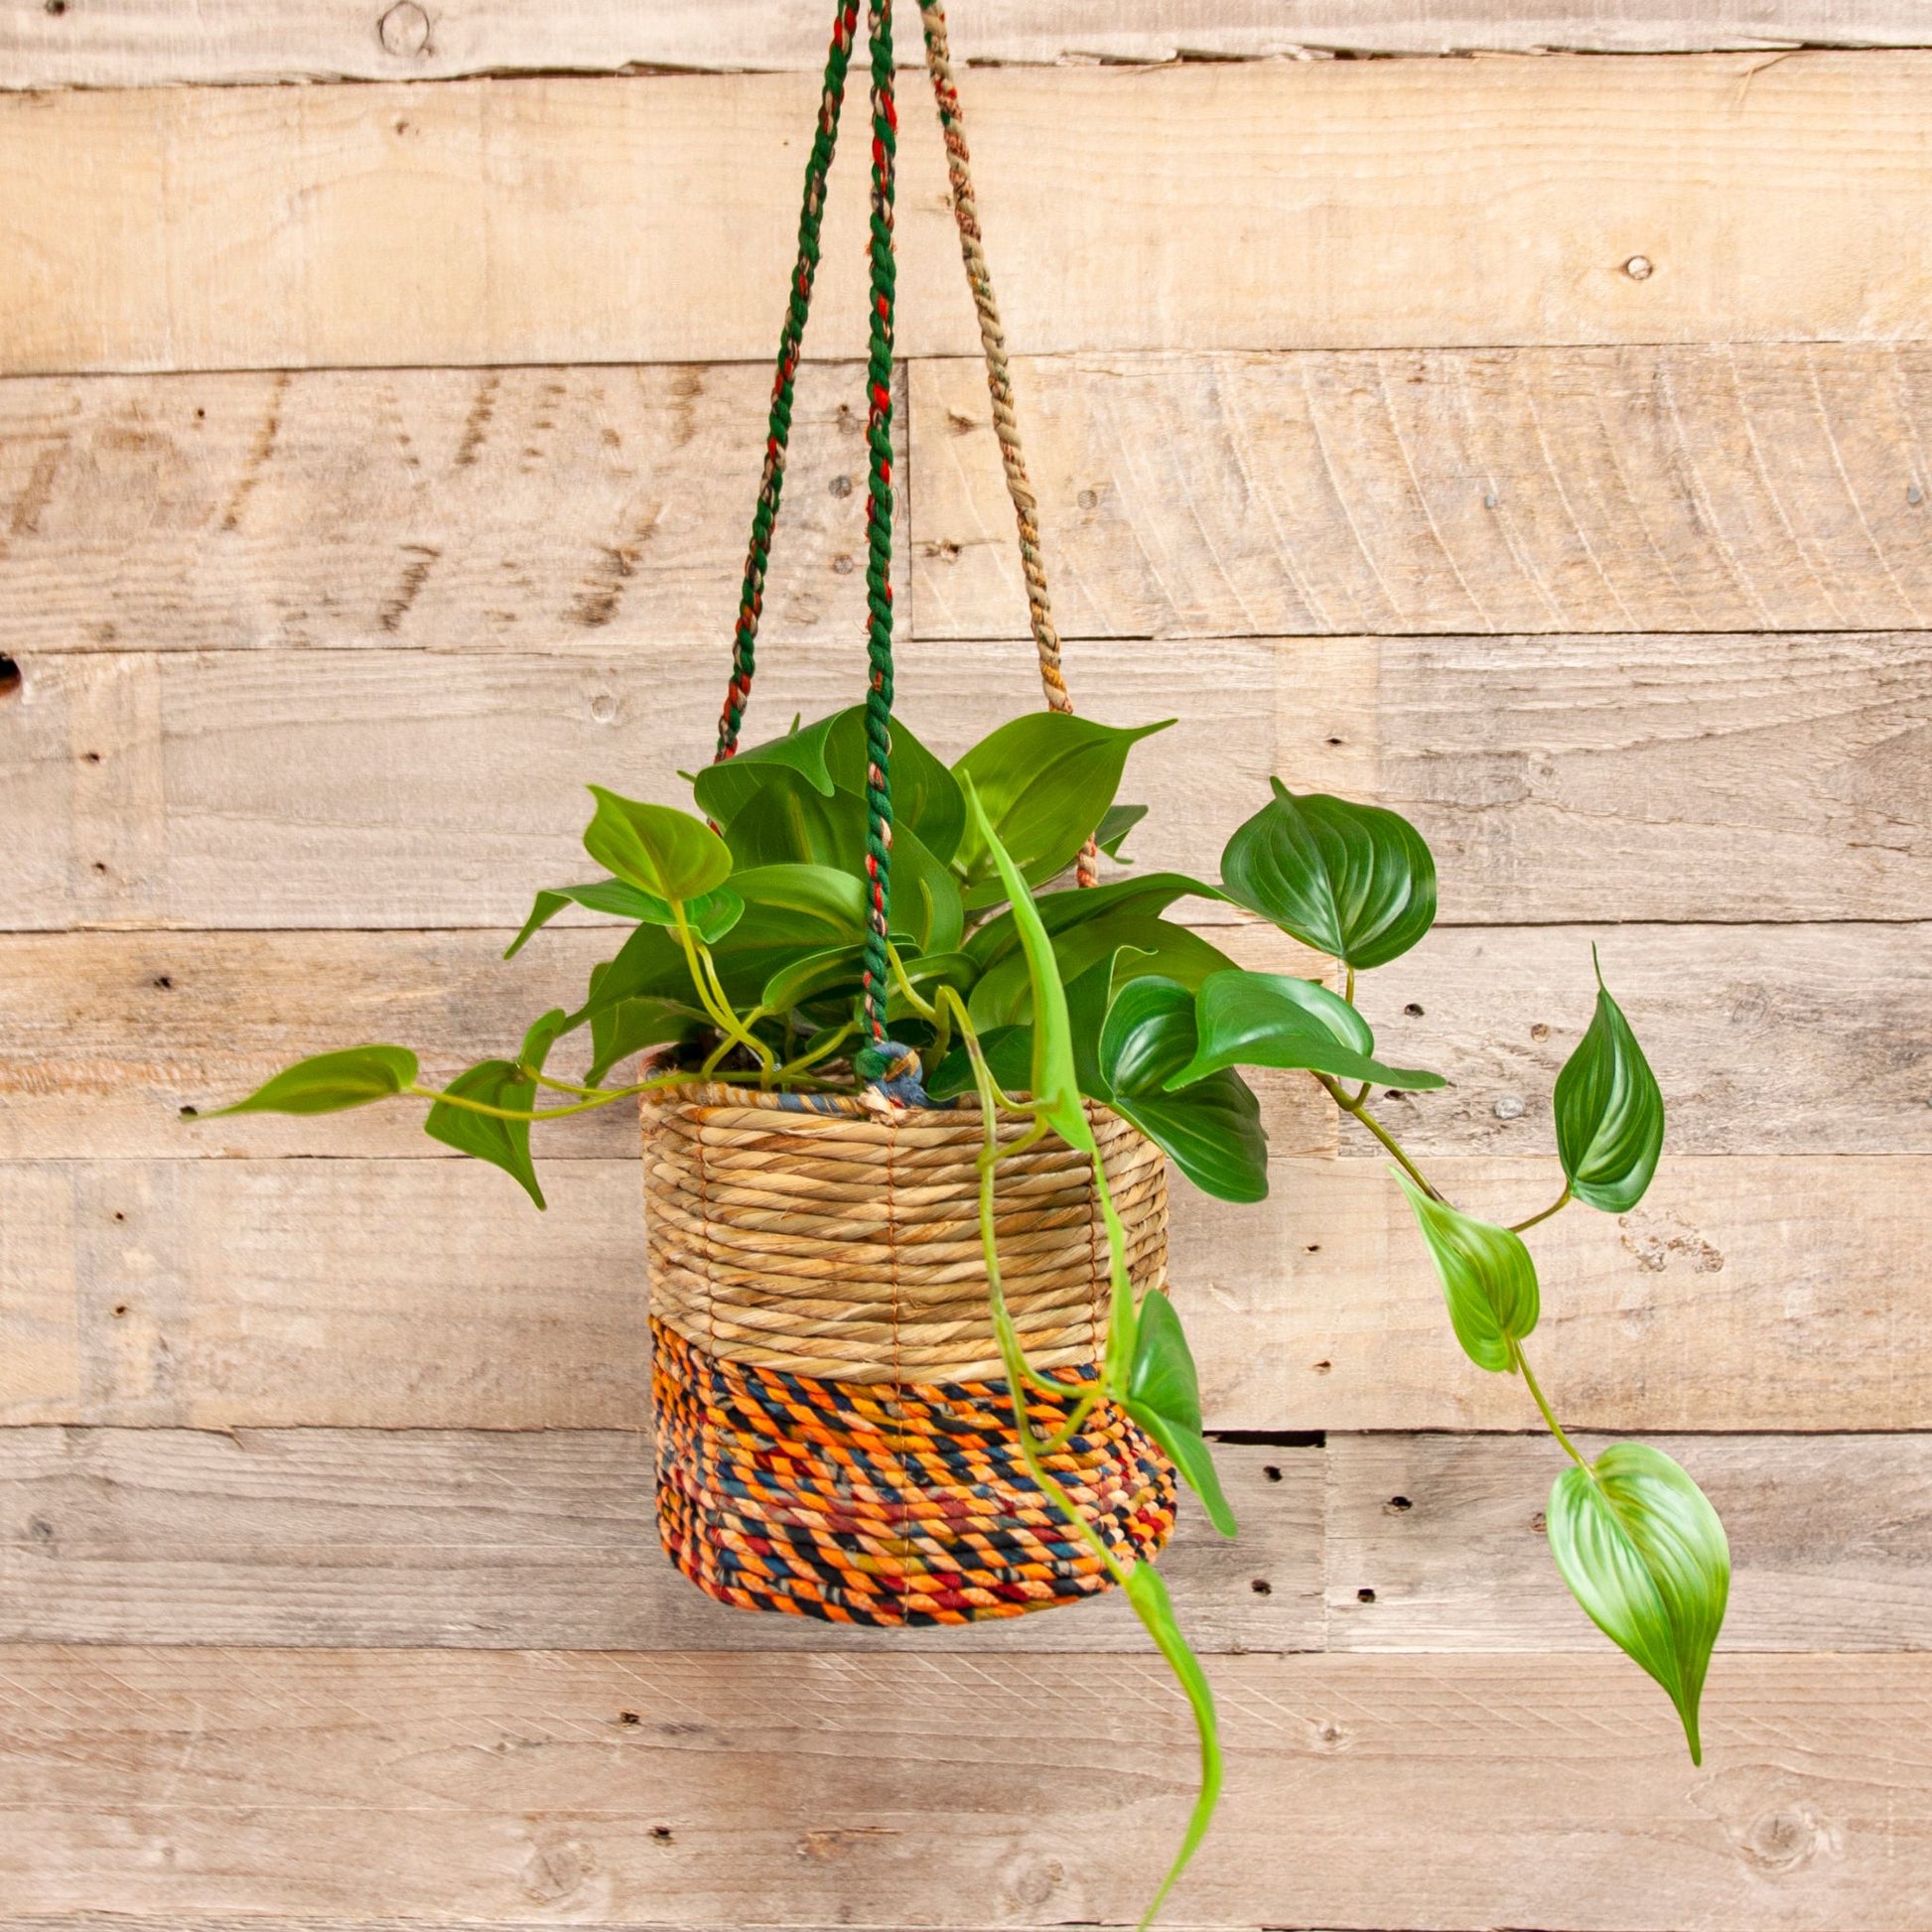 Artisan Hanging Planter - Round - with trailing plant